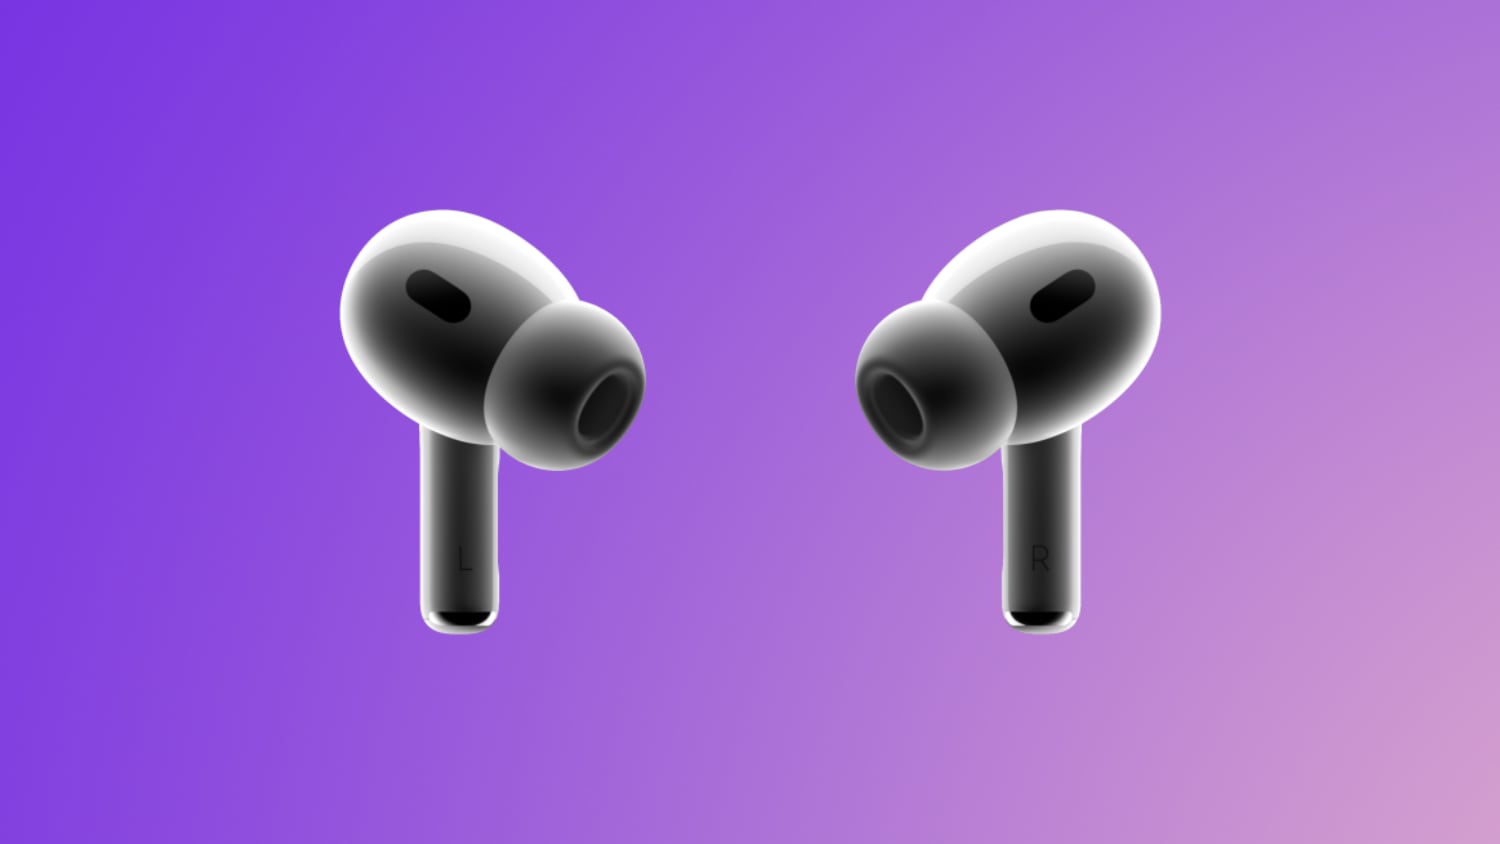 AirPods Pro: Recently Launched! H2 Chip and Battery Life